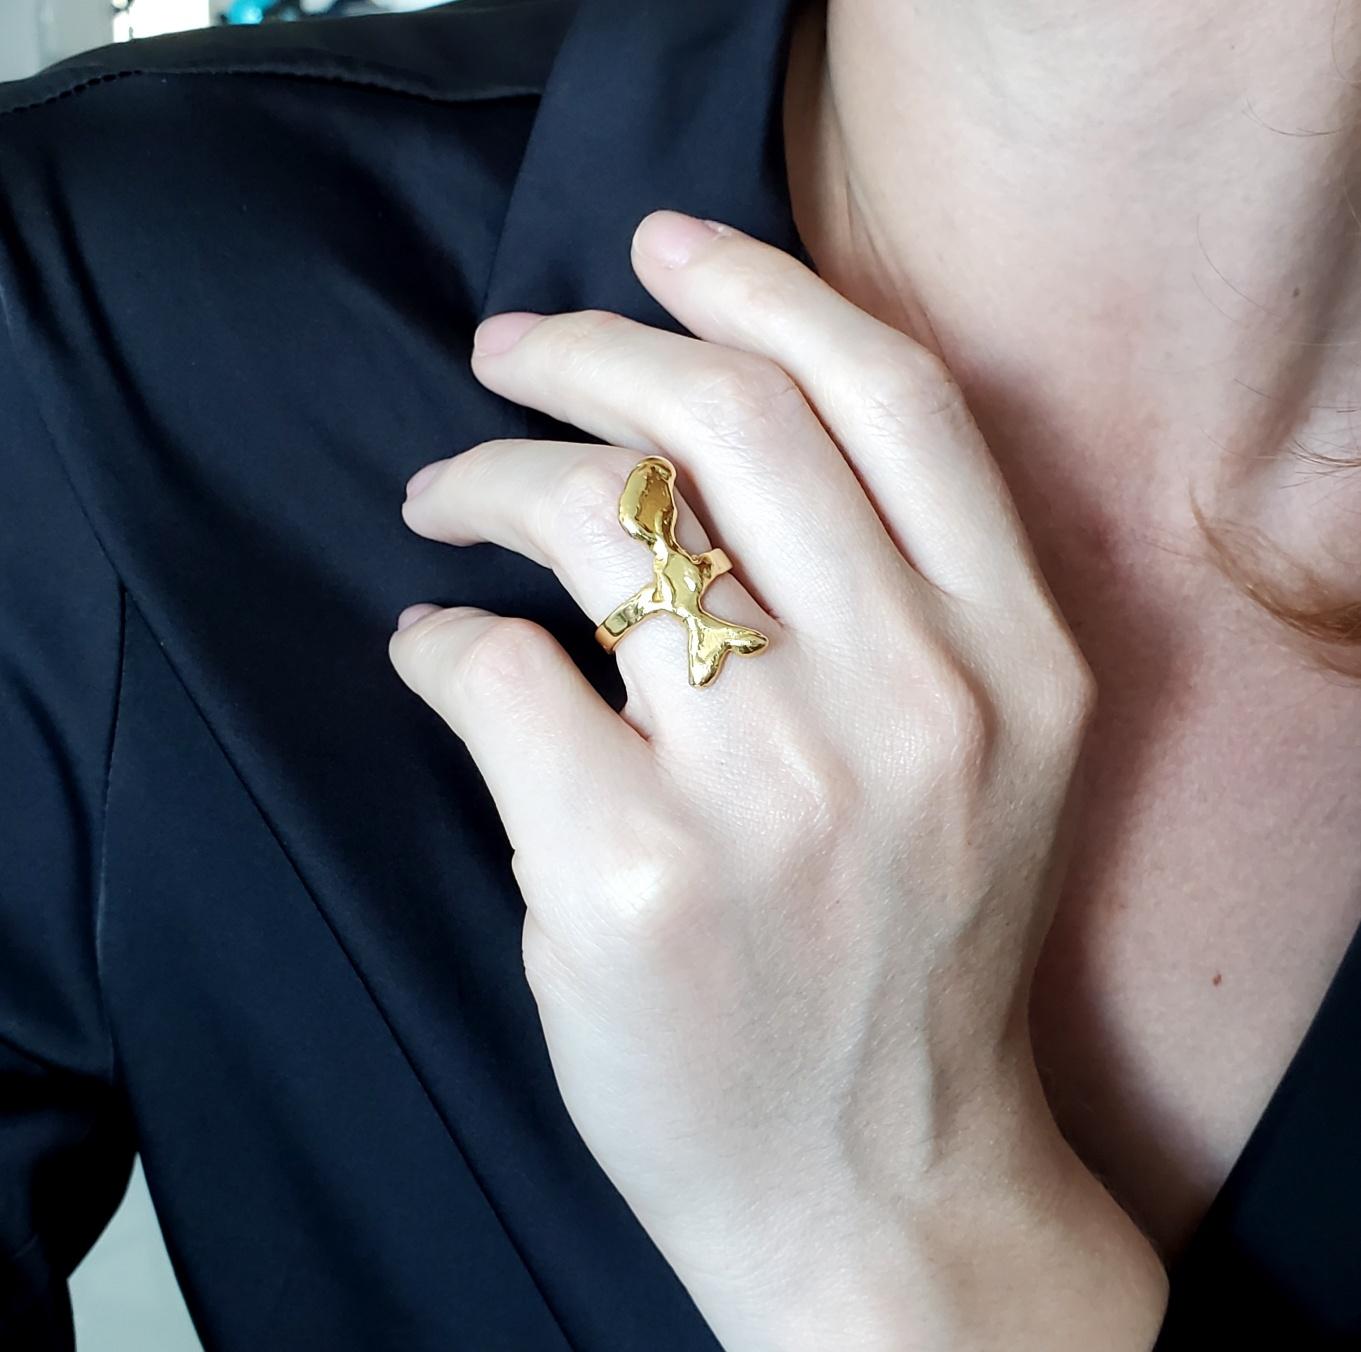 Abstract cocktail ring designed by Jean Mahie.

A beautiful piece of wearable art, created in Paris France by the artist and goldsmith Jean Mahie. This vintage sculptural ring has been crafted with abstract shape in solid rich yellow gold of 22